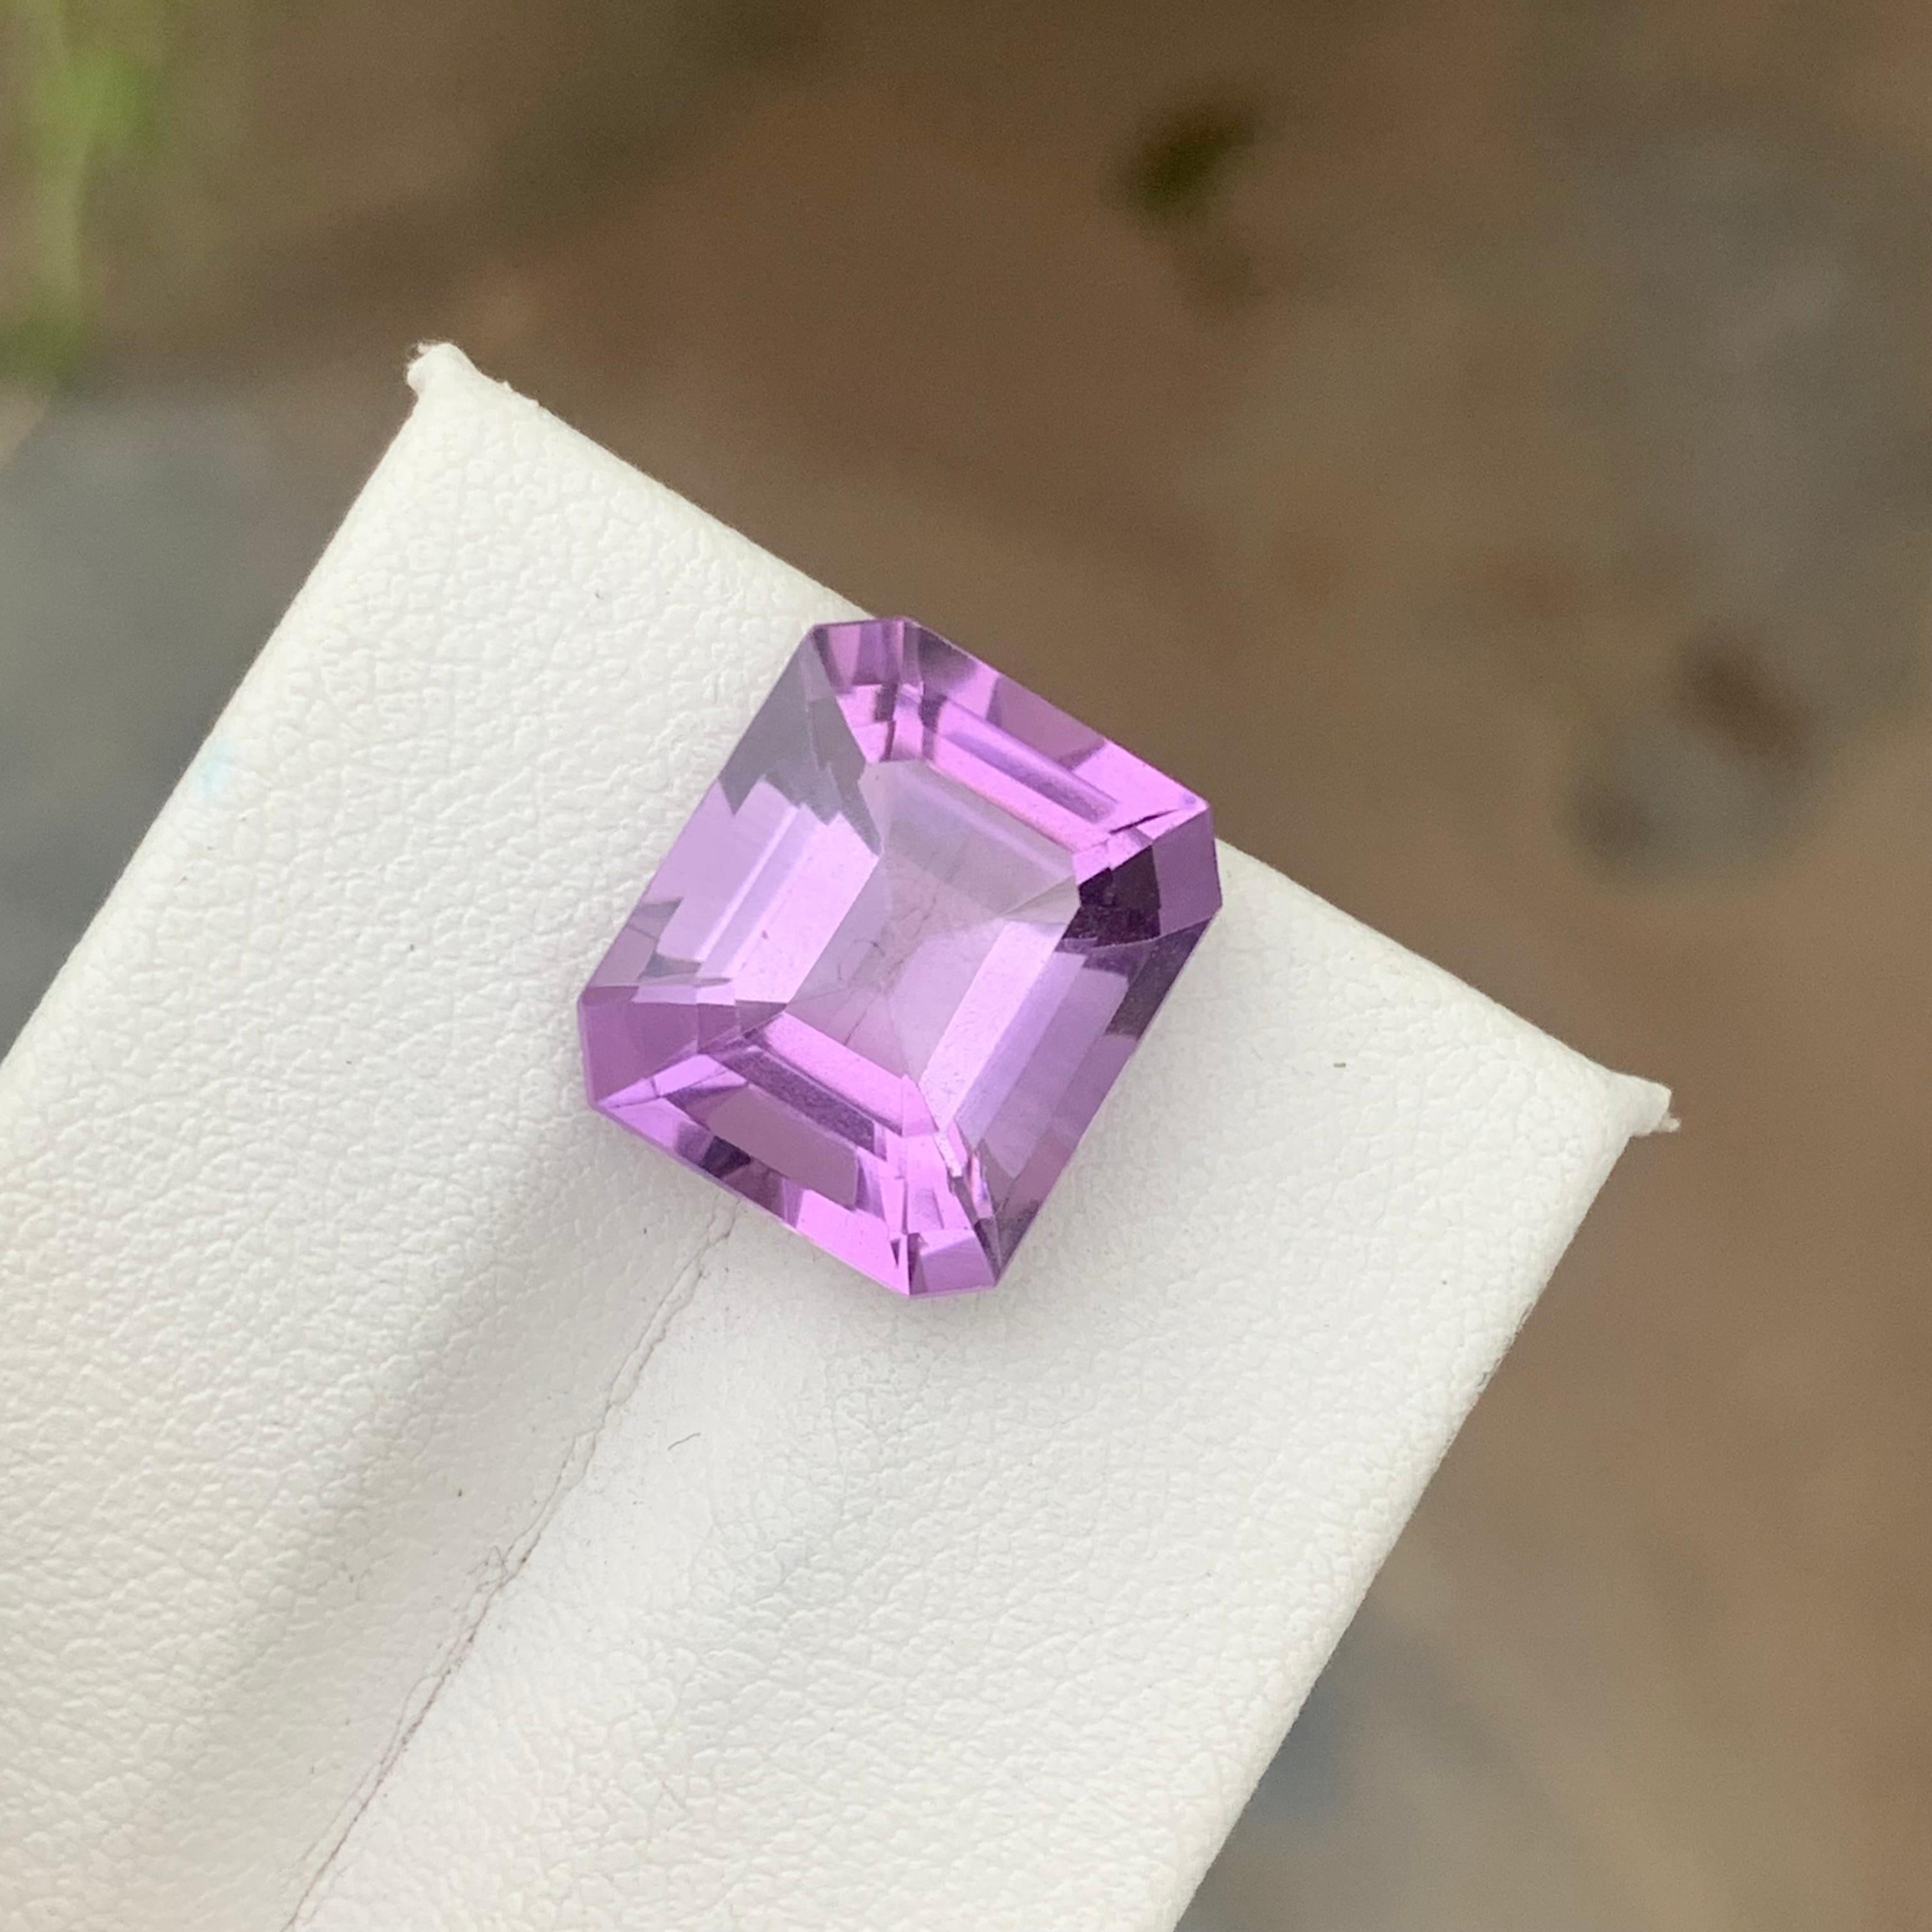 Gemstone Type : Amethyst
Weight : 8.10 Carats
Dimensions: 13.5x11.6x8.2 mm
Clarity : Clean
Origin : Brazil
Color: Purple
Shape: Emerald
Facet: Emerald Cut
Certificate: On Demand
Month: February
.
Purported amethyst powers for healing
enhancing the